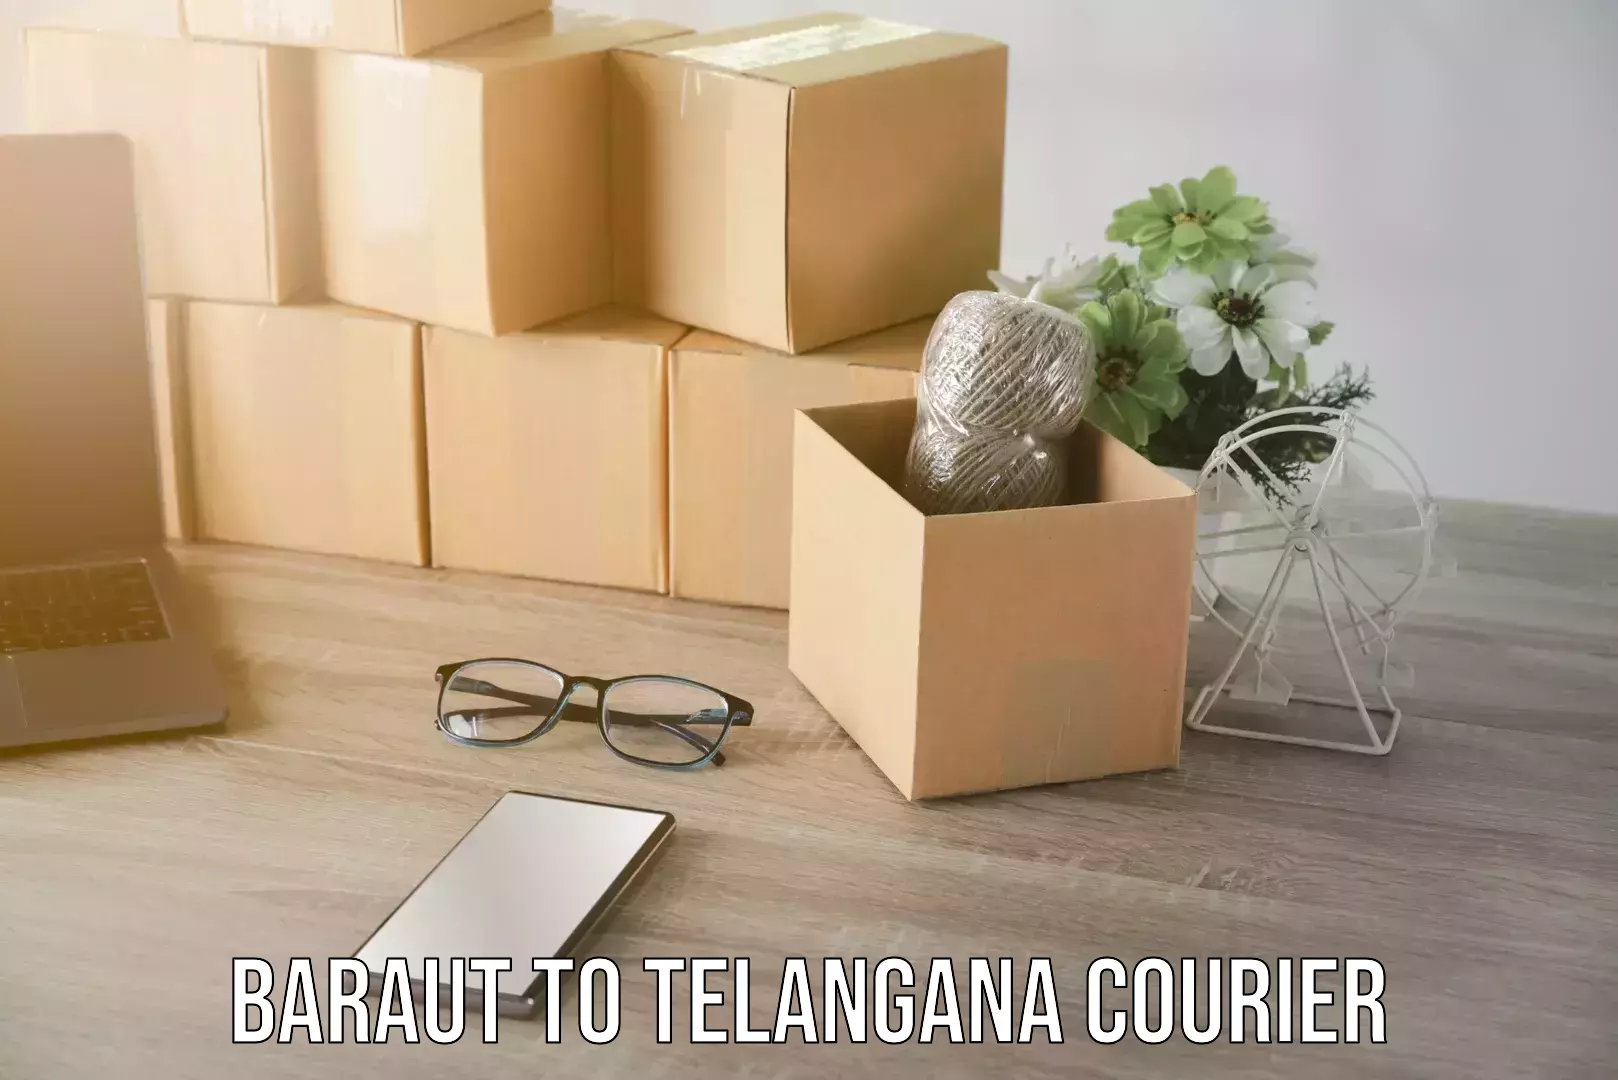 End-to-end delivery Baraut to Telangana